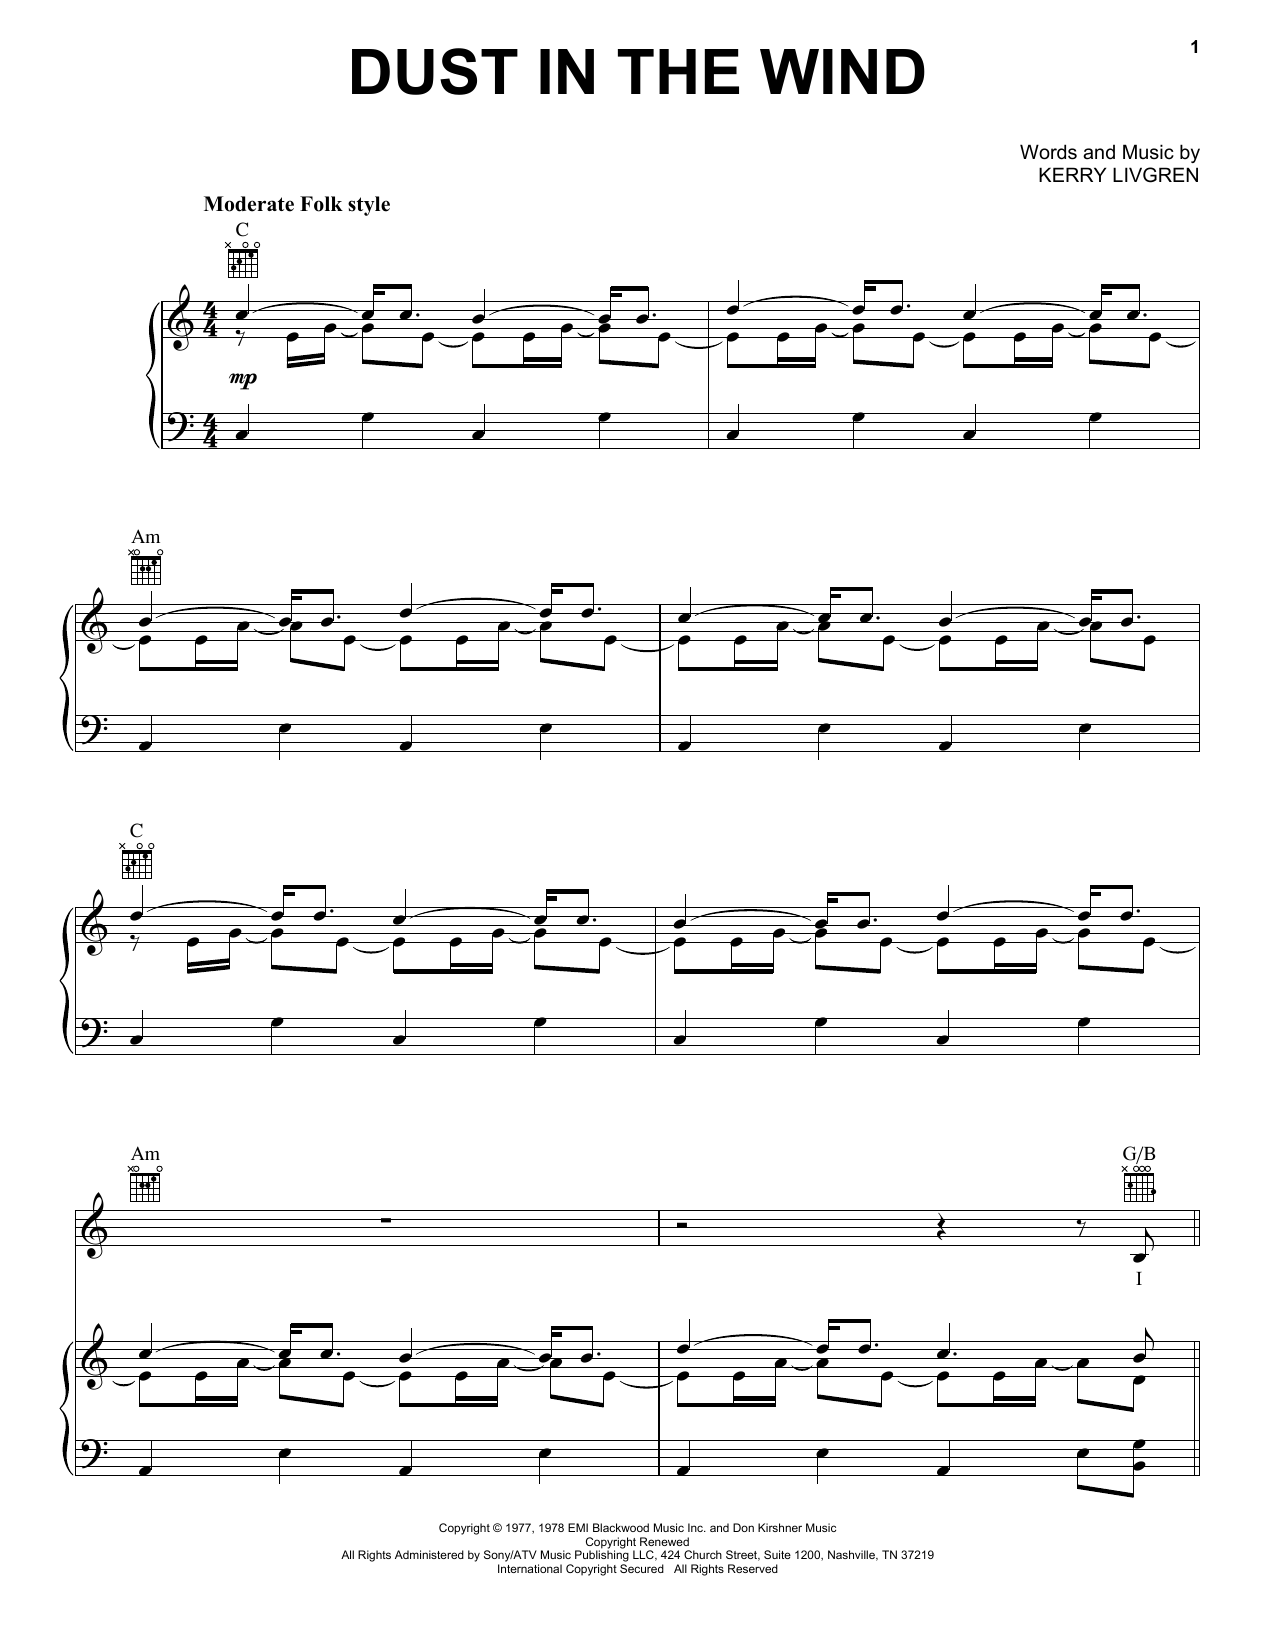 Kansas Dust In The Wind sheet music notes and chords. Download Printable PDF.